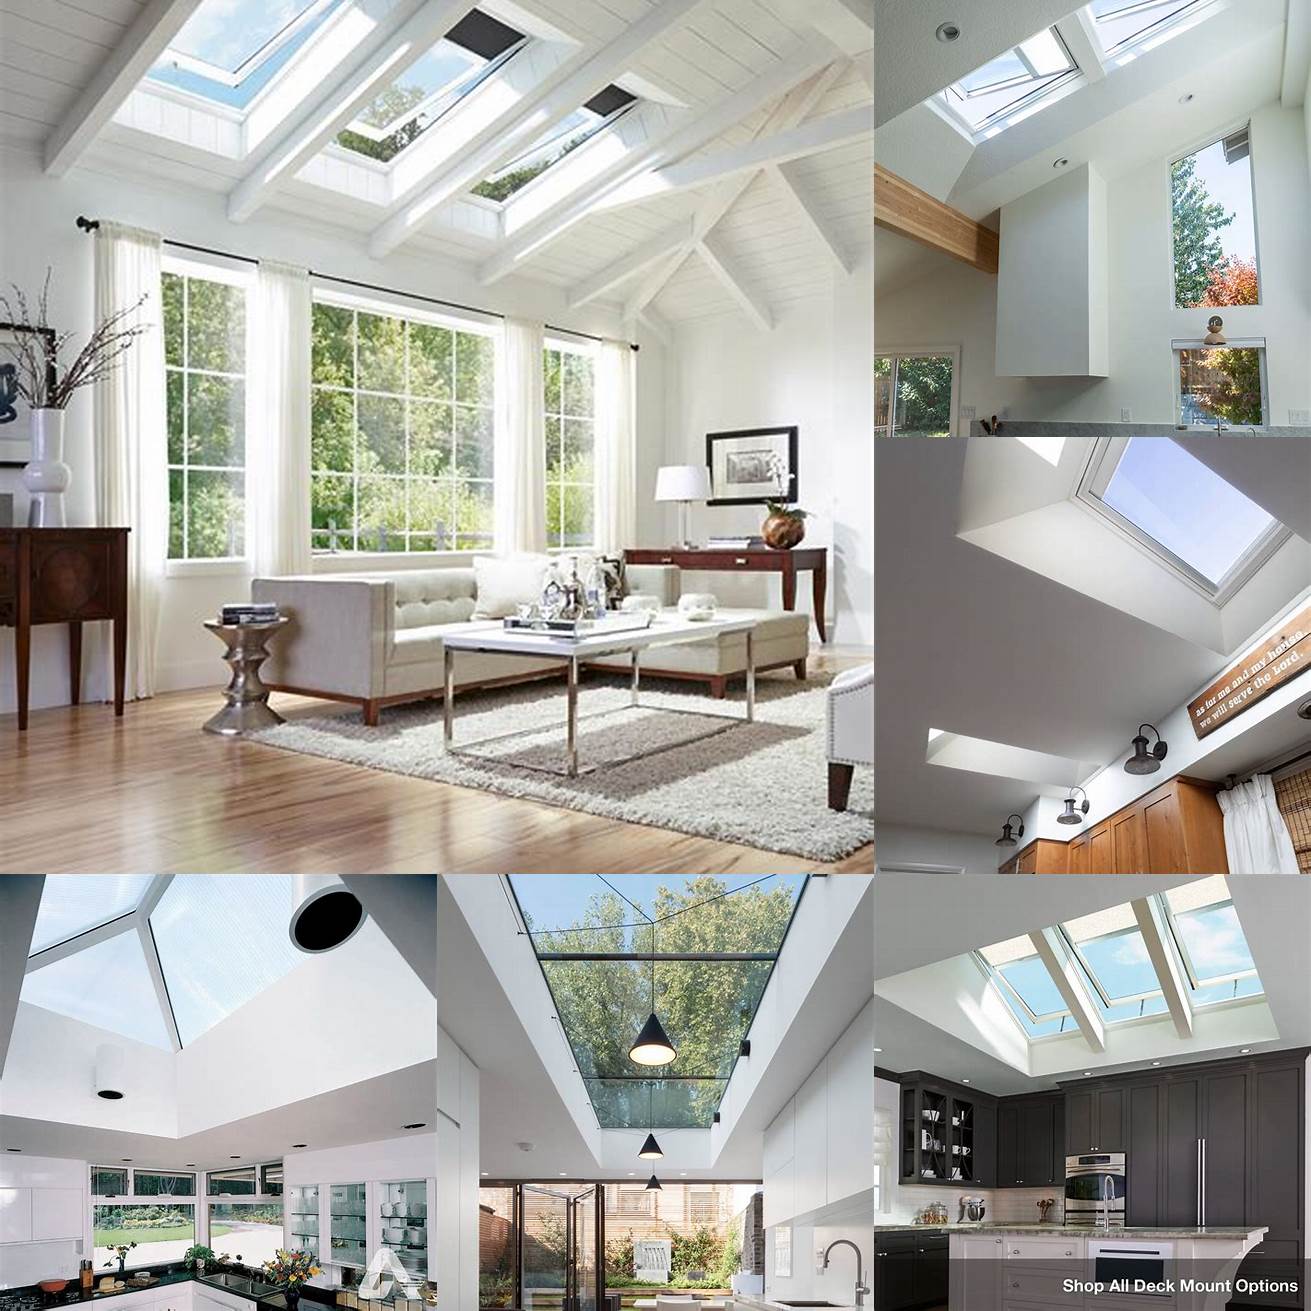 Skylights for additional natural light